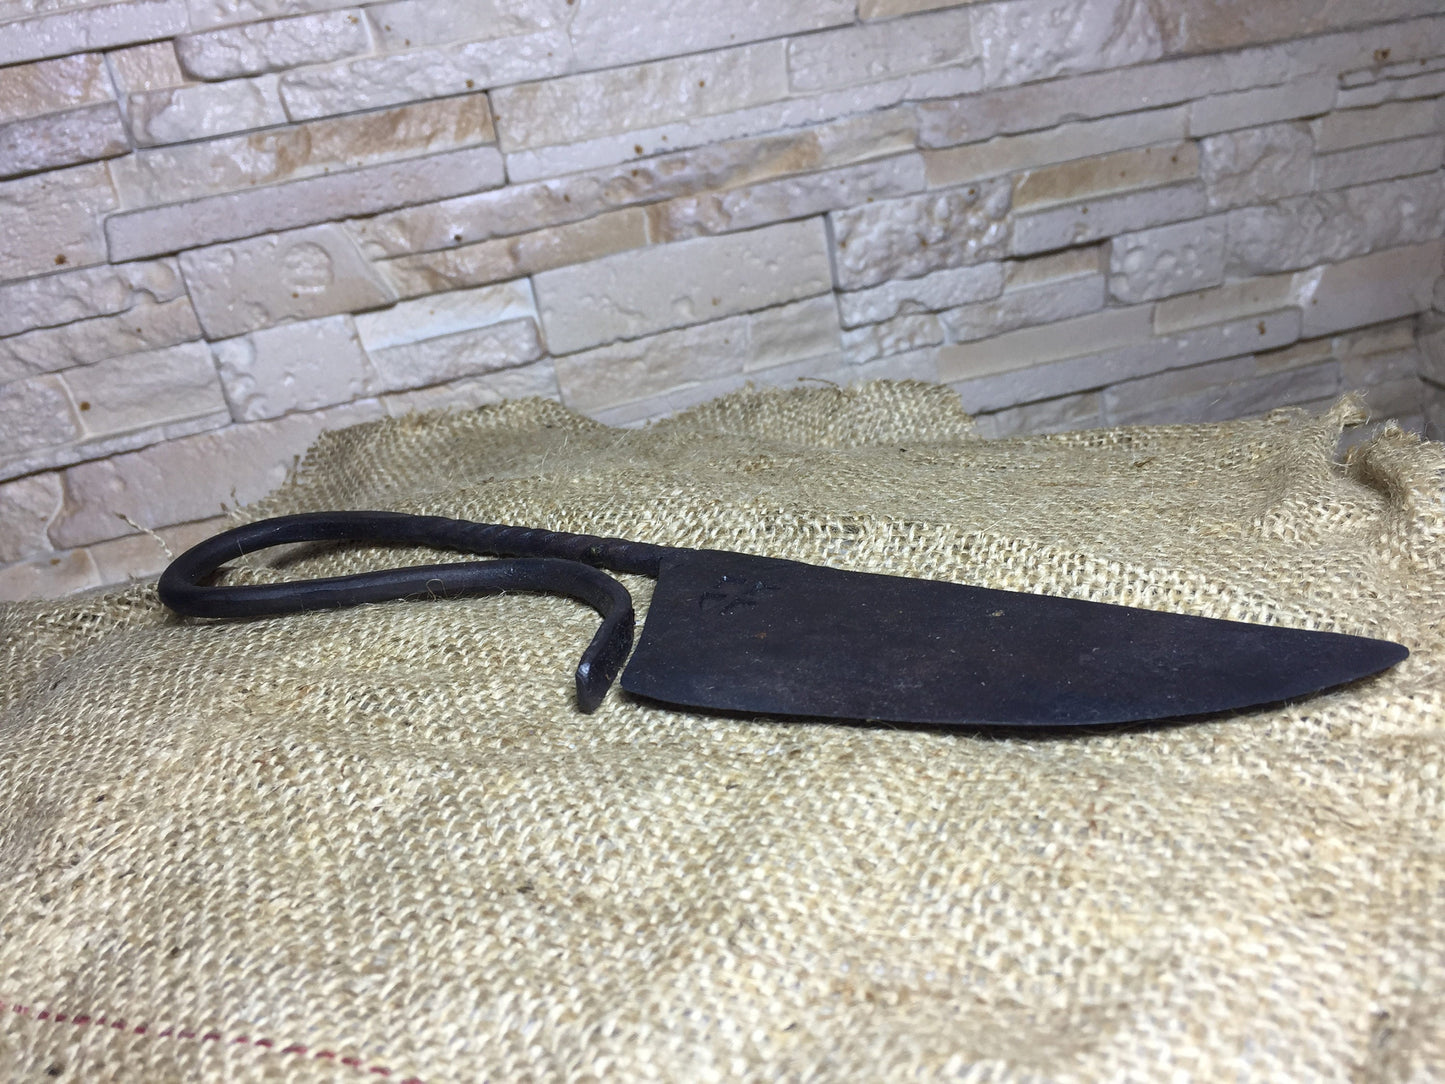 Hand forged knife, wrought iron knife, viking knife, steampunk sculpture, industrial art, metal gift for him, metal gift for man, gift knife